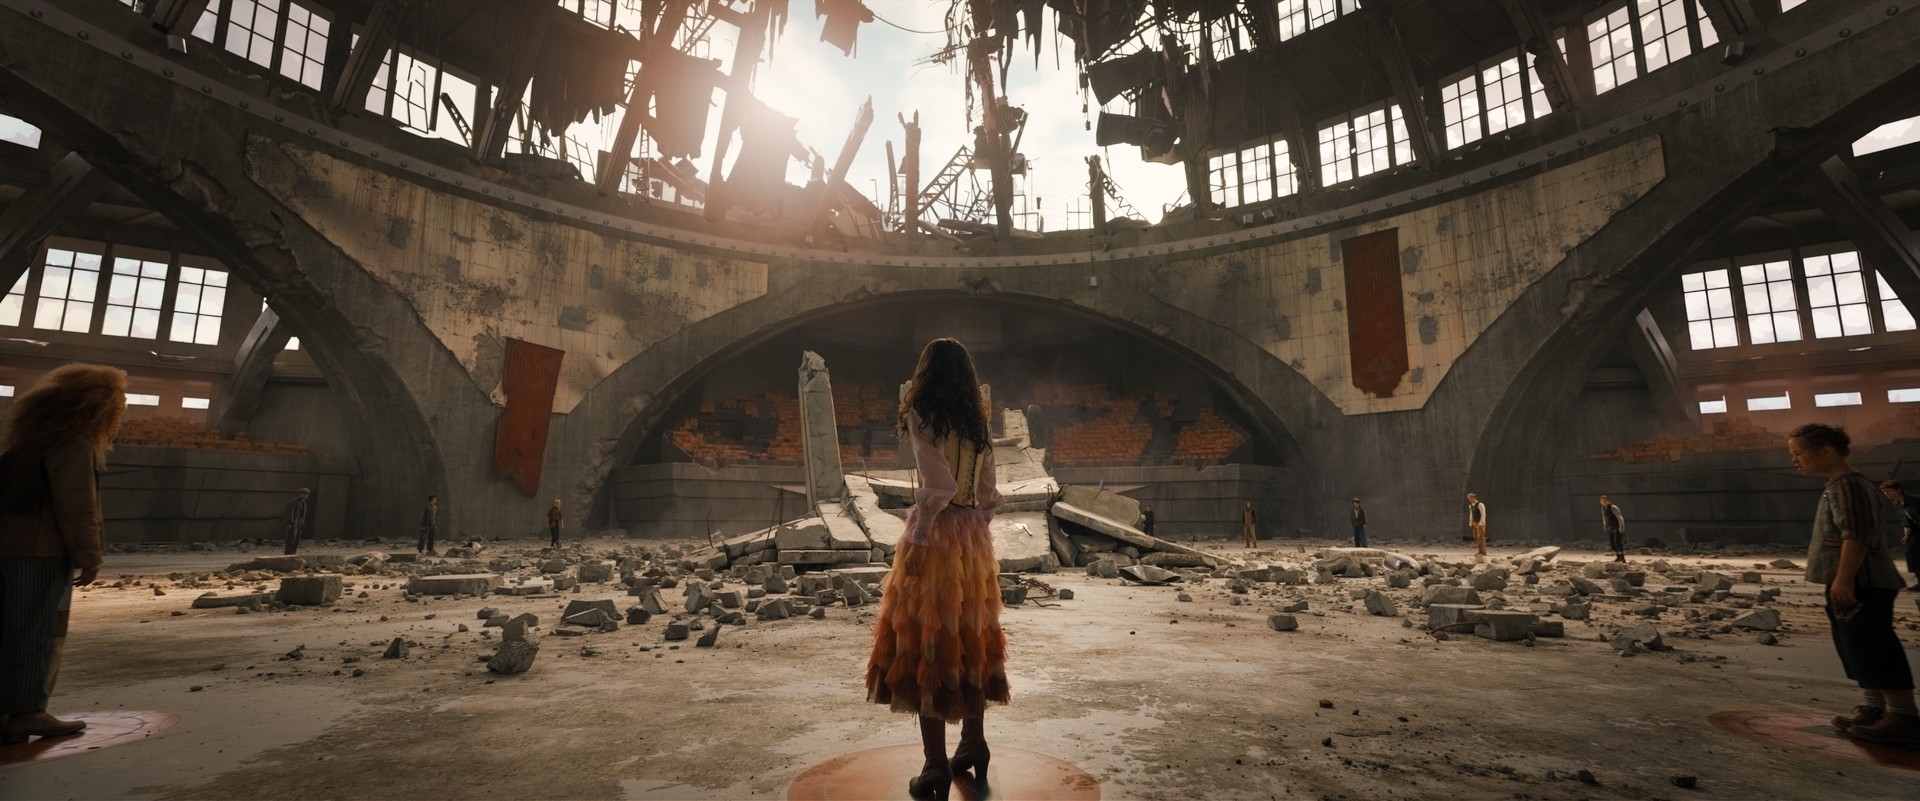 A woman stands in the middle of an abandoned, crumbling building with other people spread throughout the space, facing away from the camera